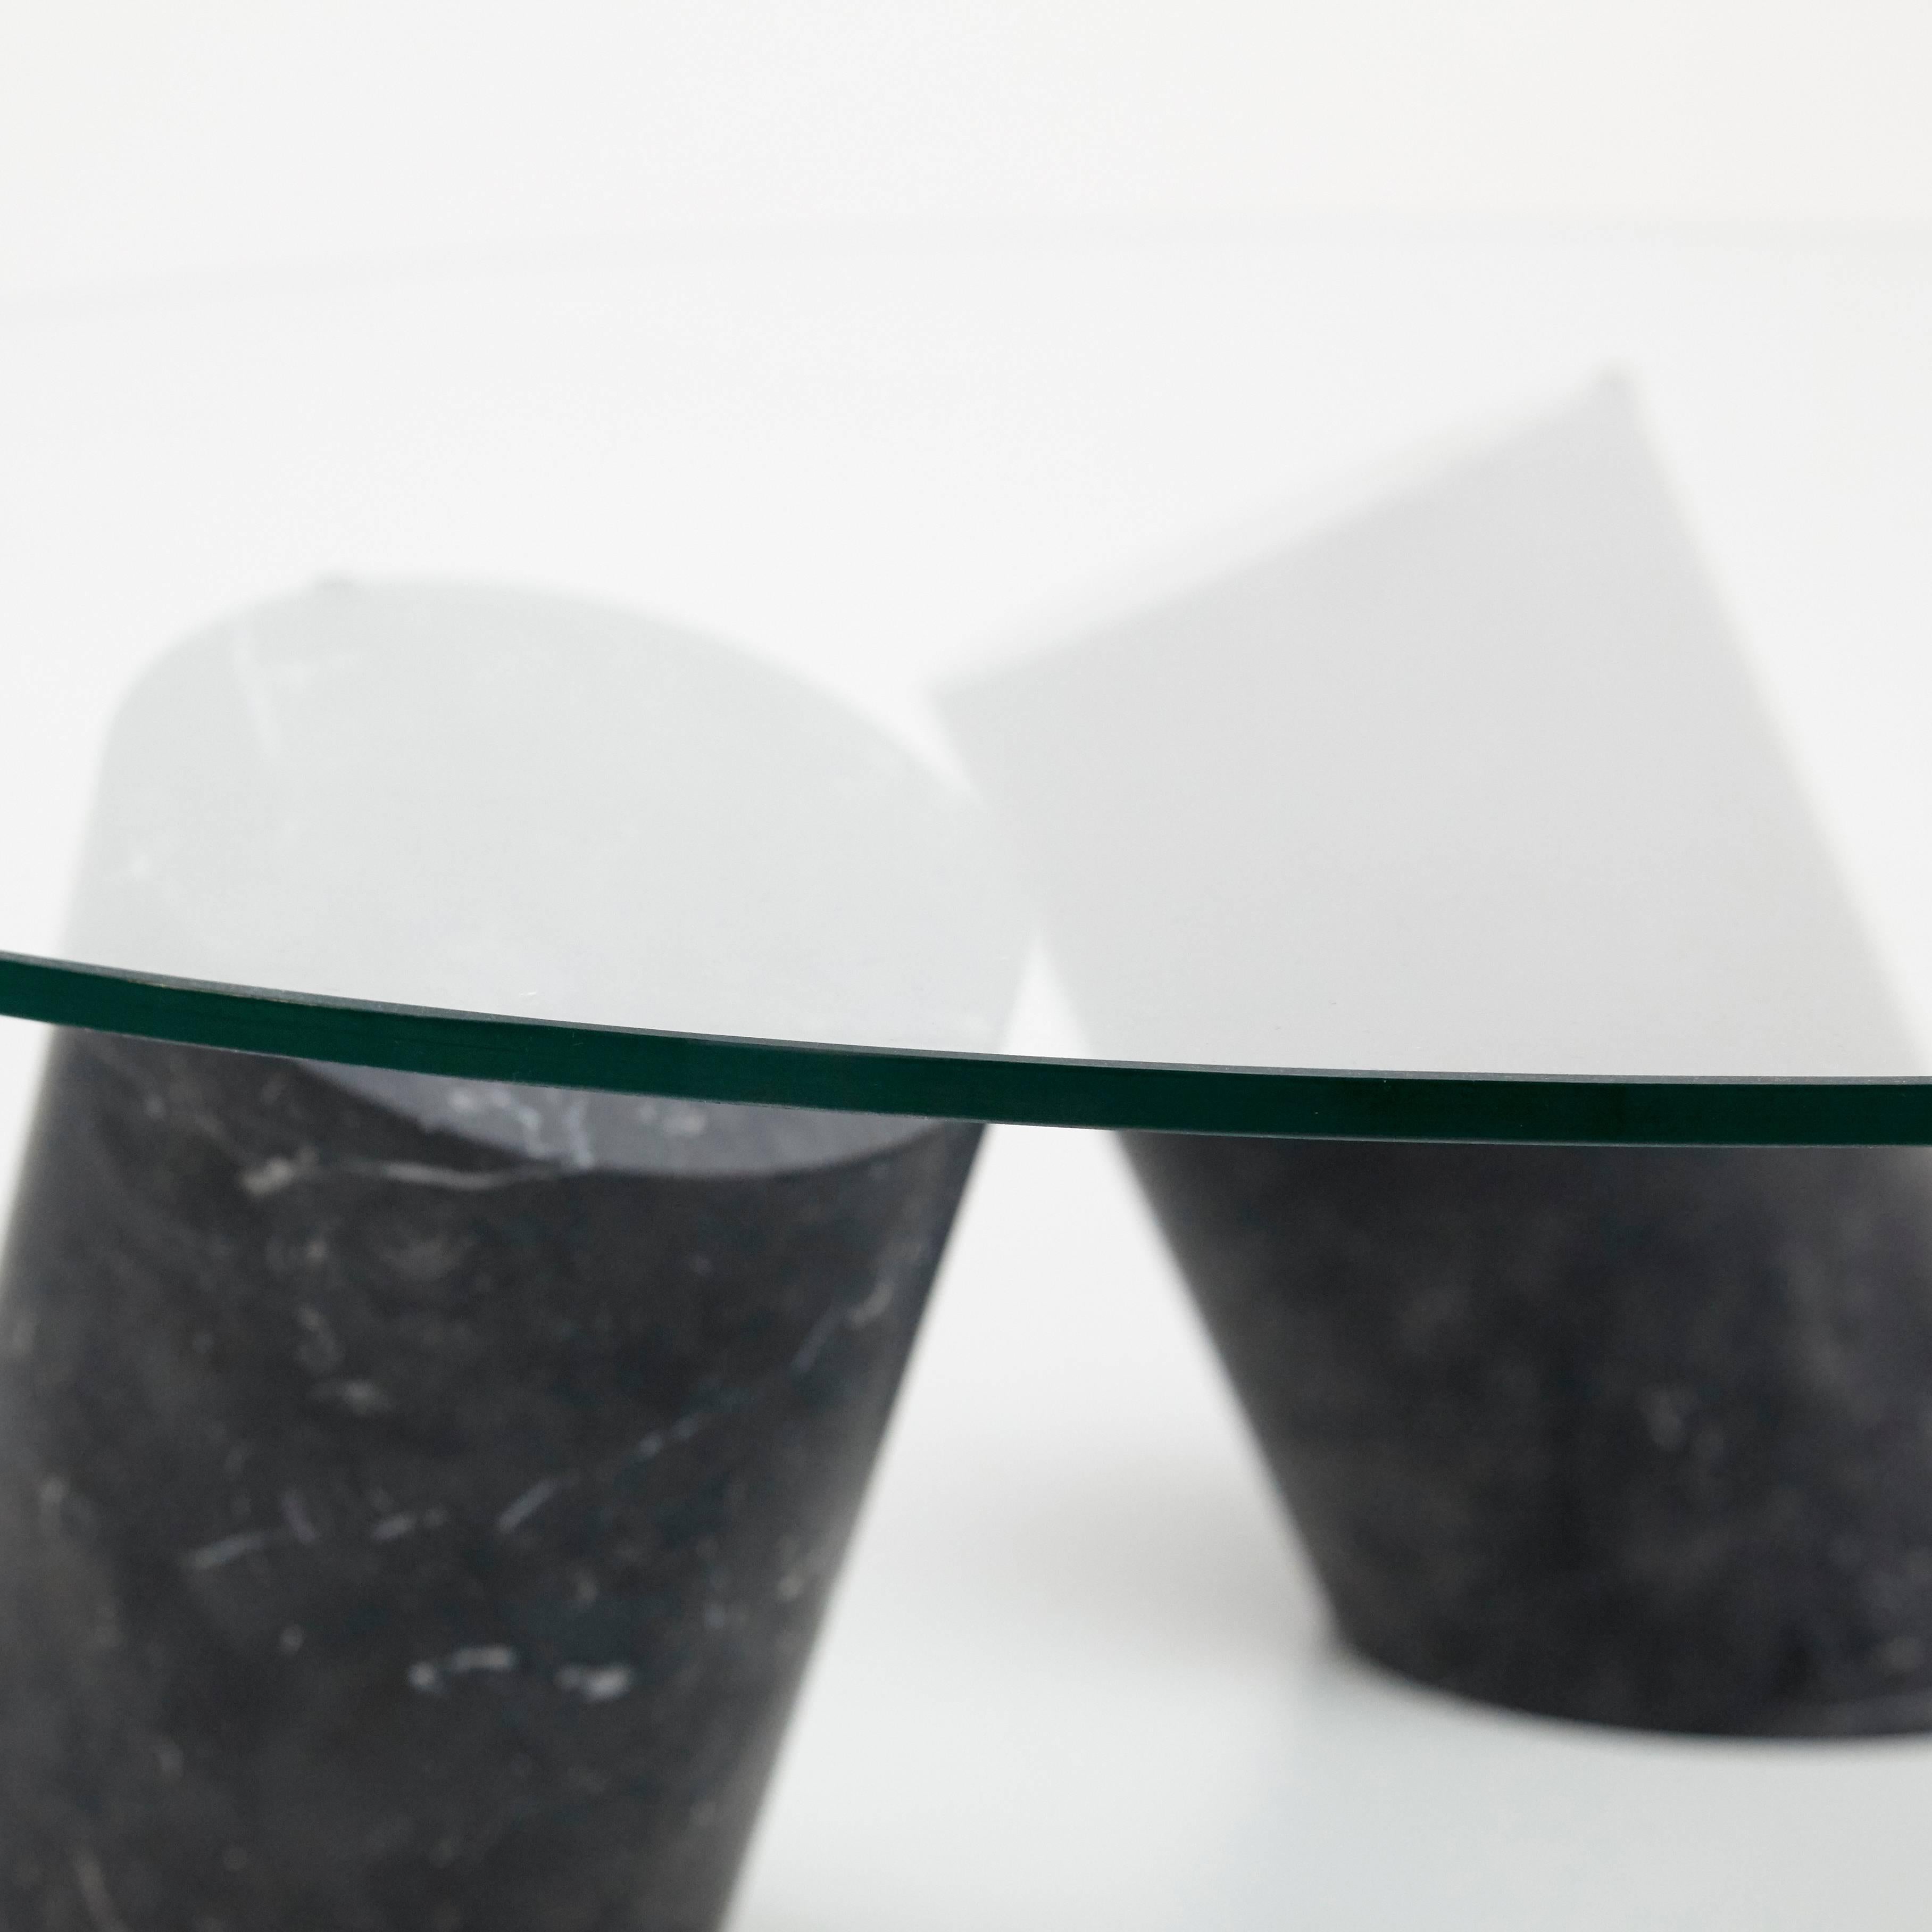 Table designed by Goula Figuera Studio.
Model Carnac. Large Version.
Manufactured in Spain, 2017.
Black marble, glass.

Pablo Figuera (Madrid 1988) and Álvaro Goula (Barcelona 1989) are design graduates from Elisava (Barcelona) and Bachelor of